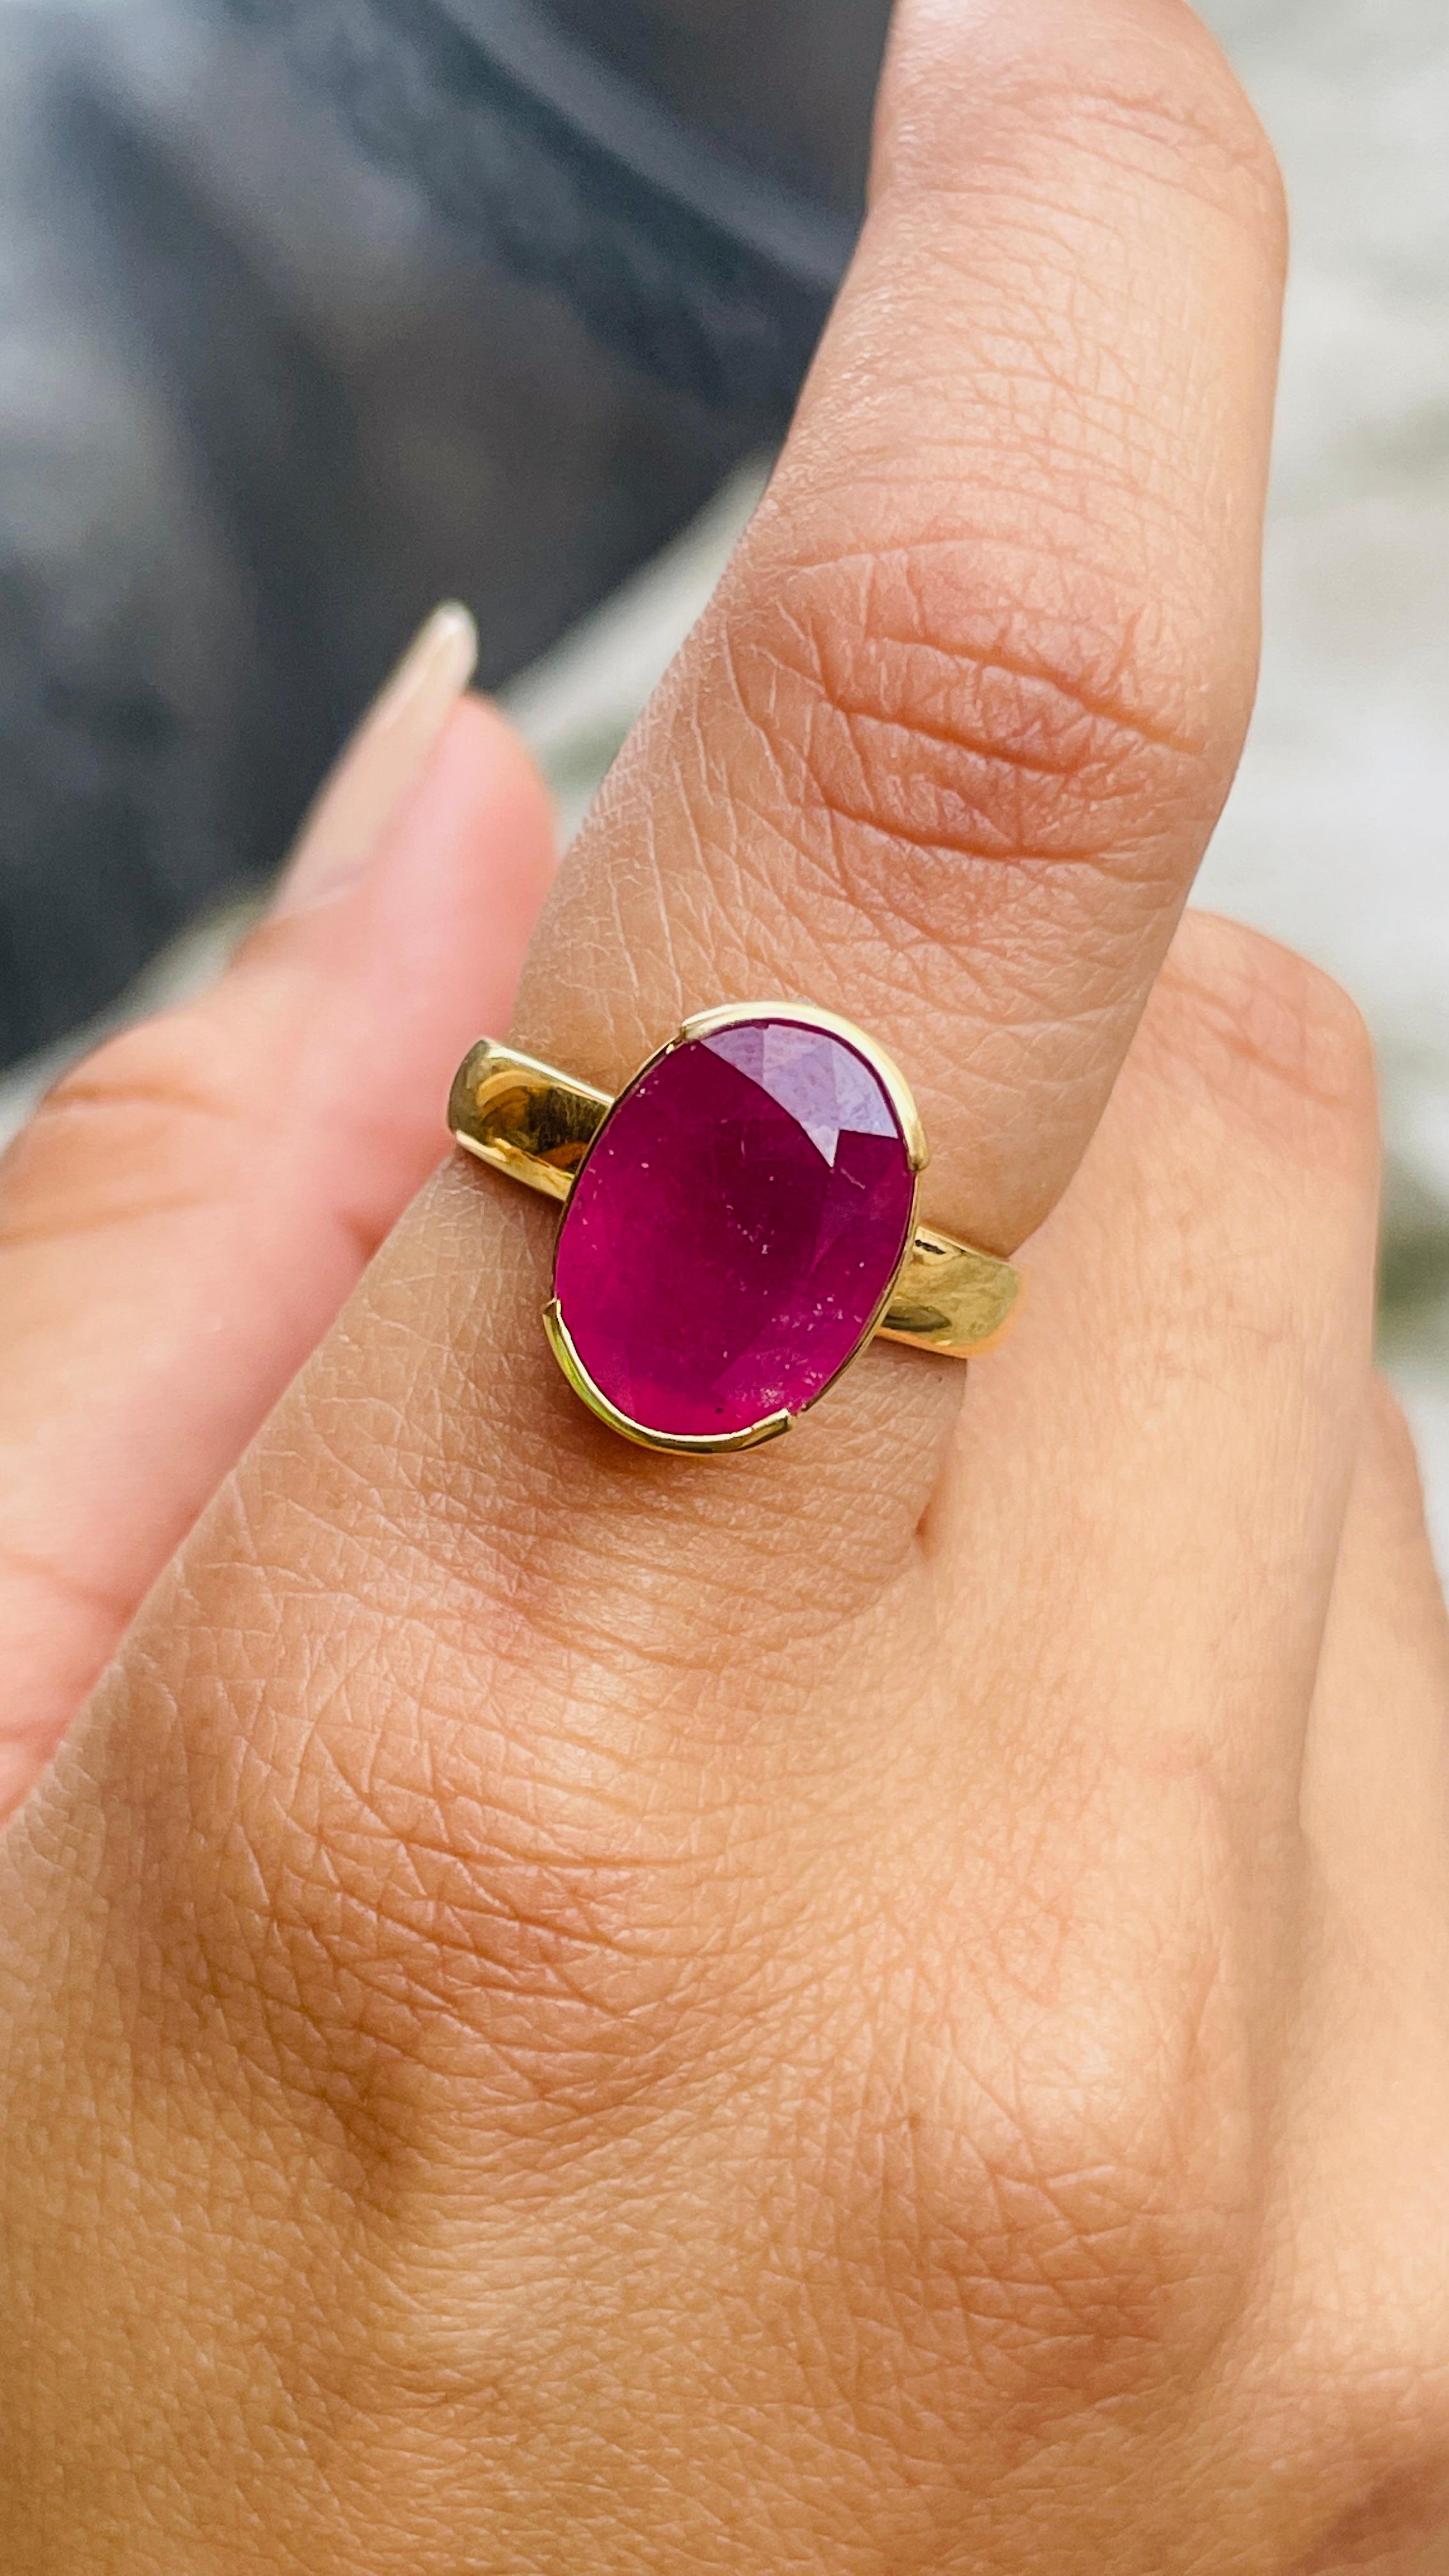 For Sale:  Contemporary Style 3.59 Carat Ruby Oval Cut Cocktail Ring in 14K Yellow Gold   3